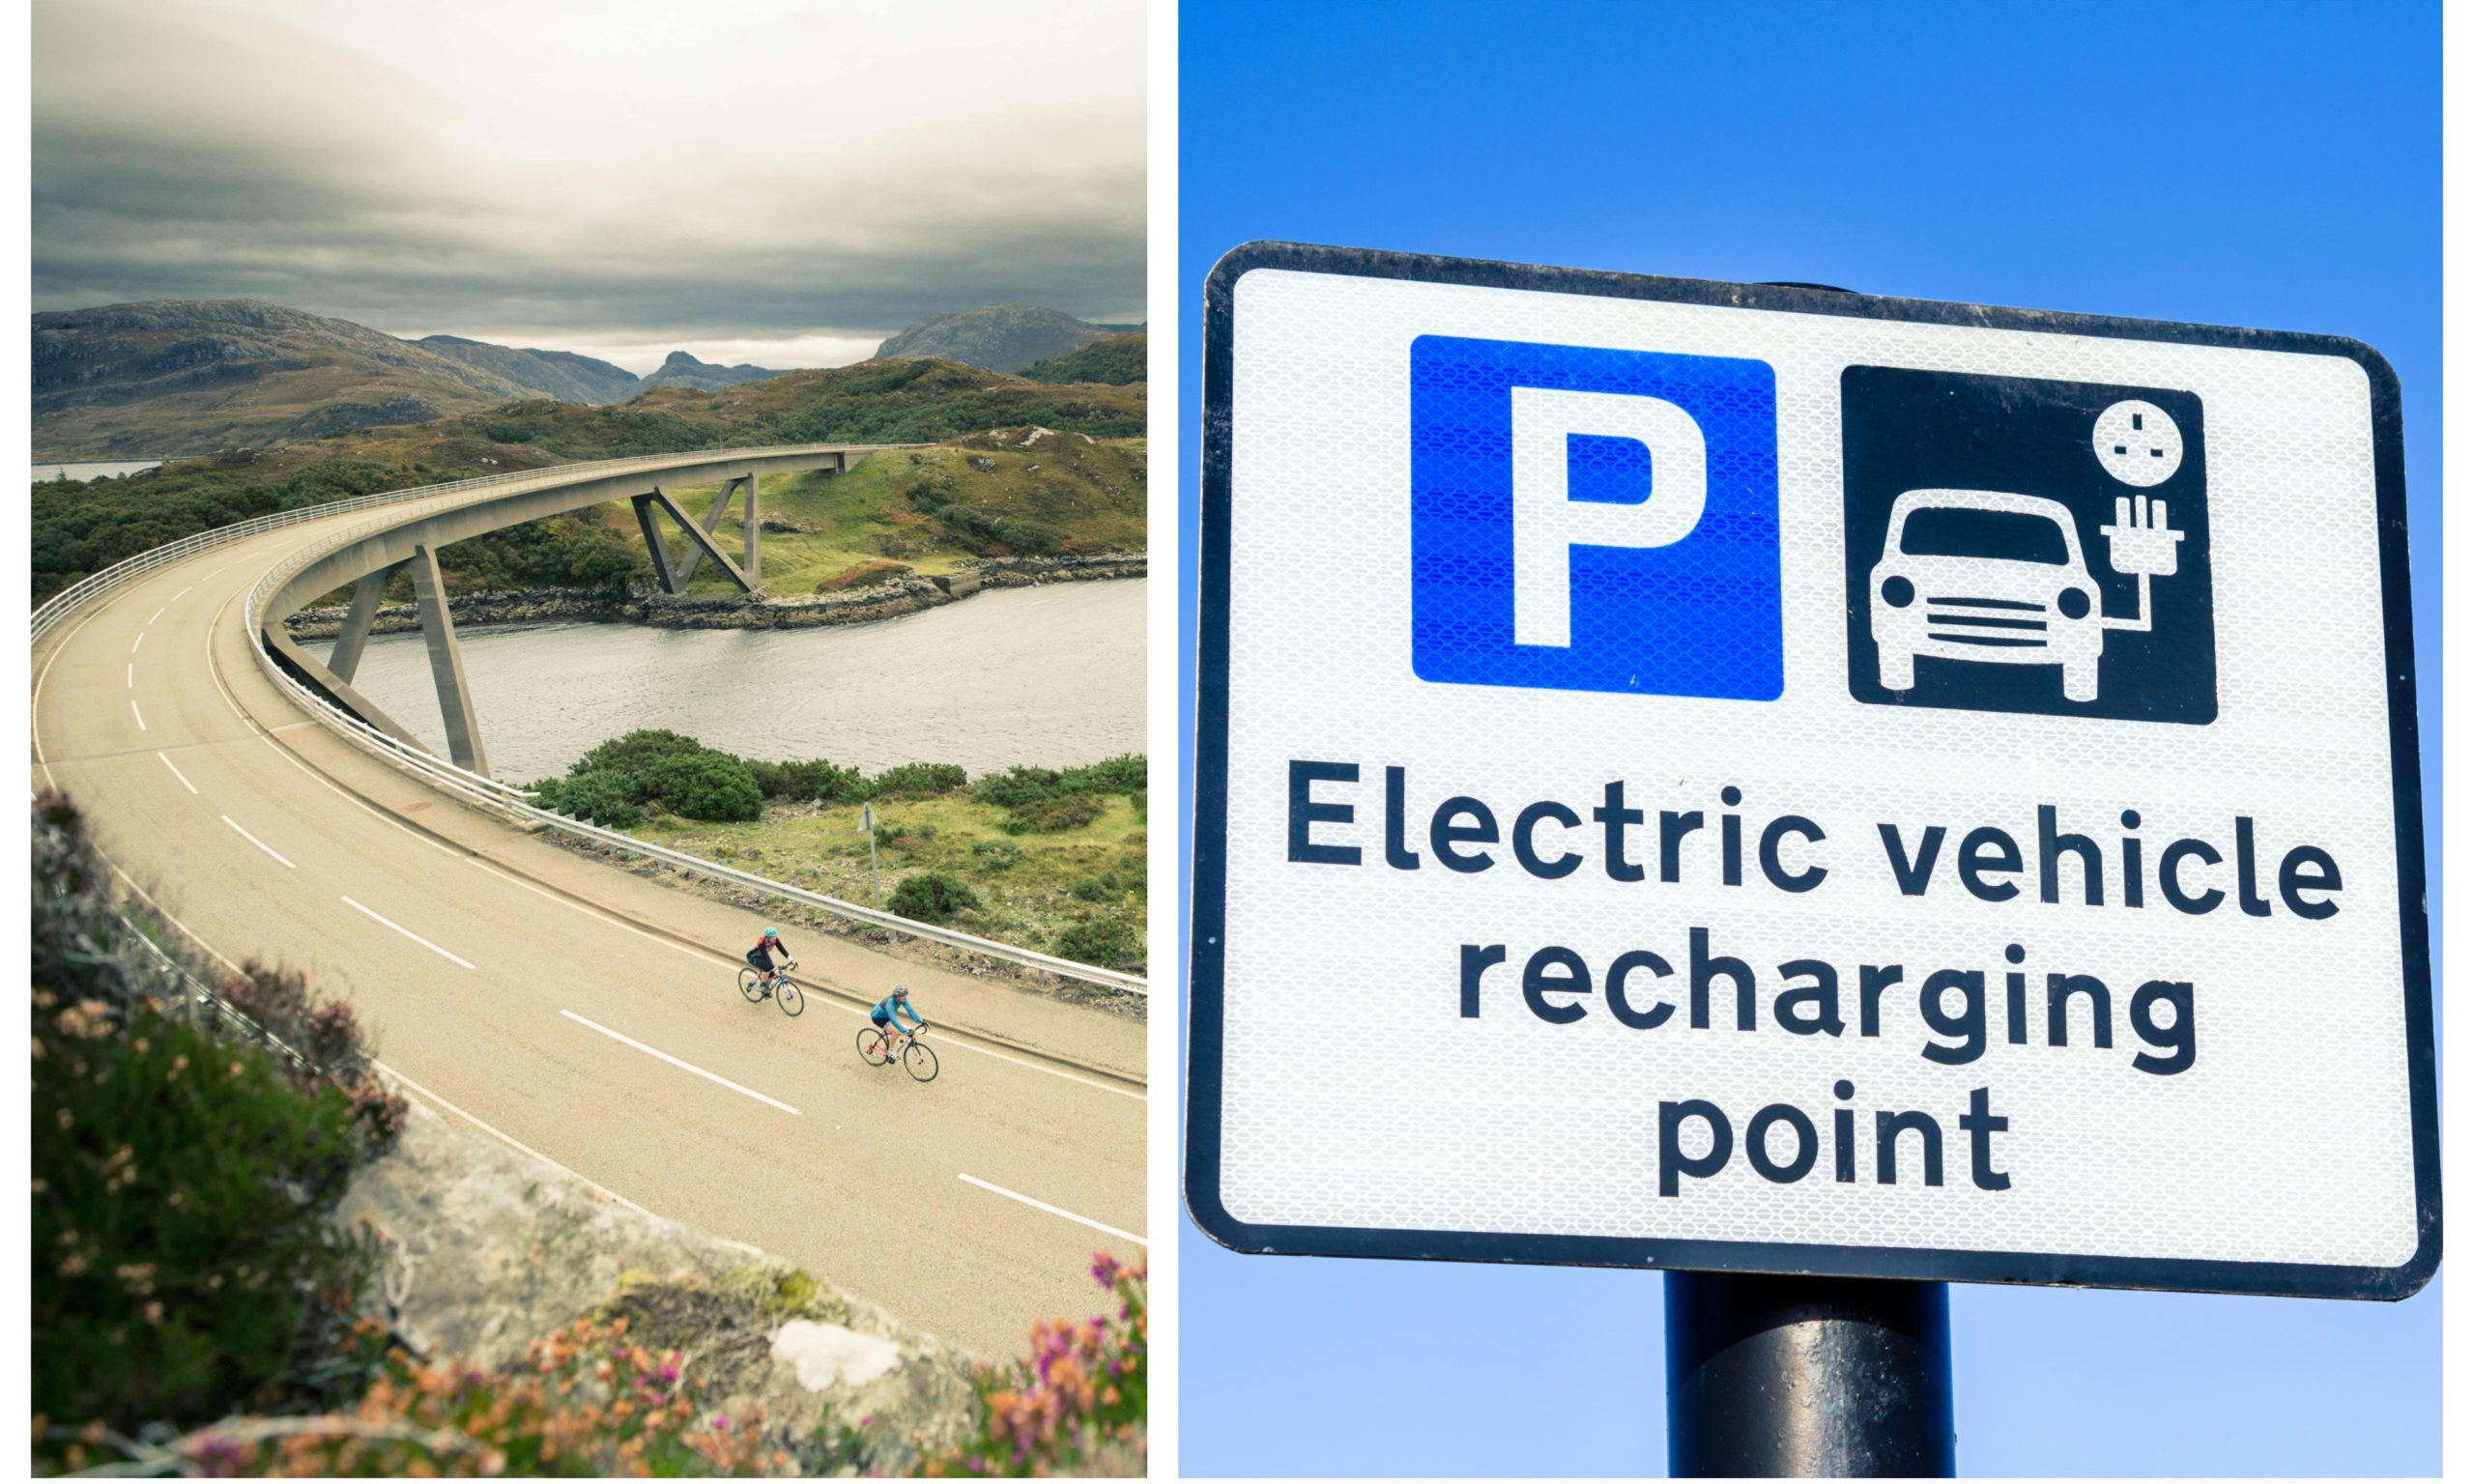 Members of the Applecross community have created a novel idea to utilise excess power generated from its community owned hydro scheme to encourage greener travel.